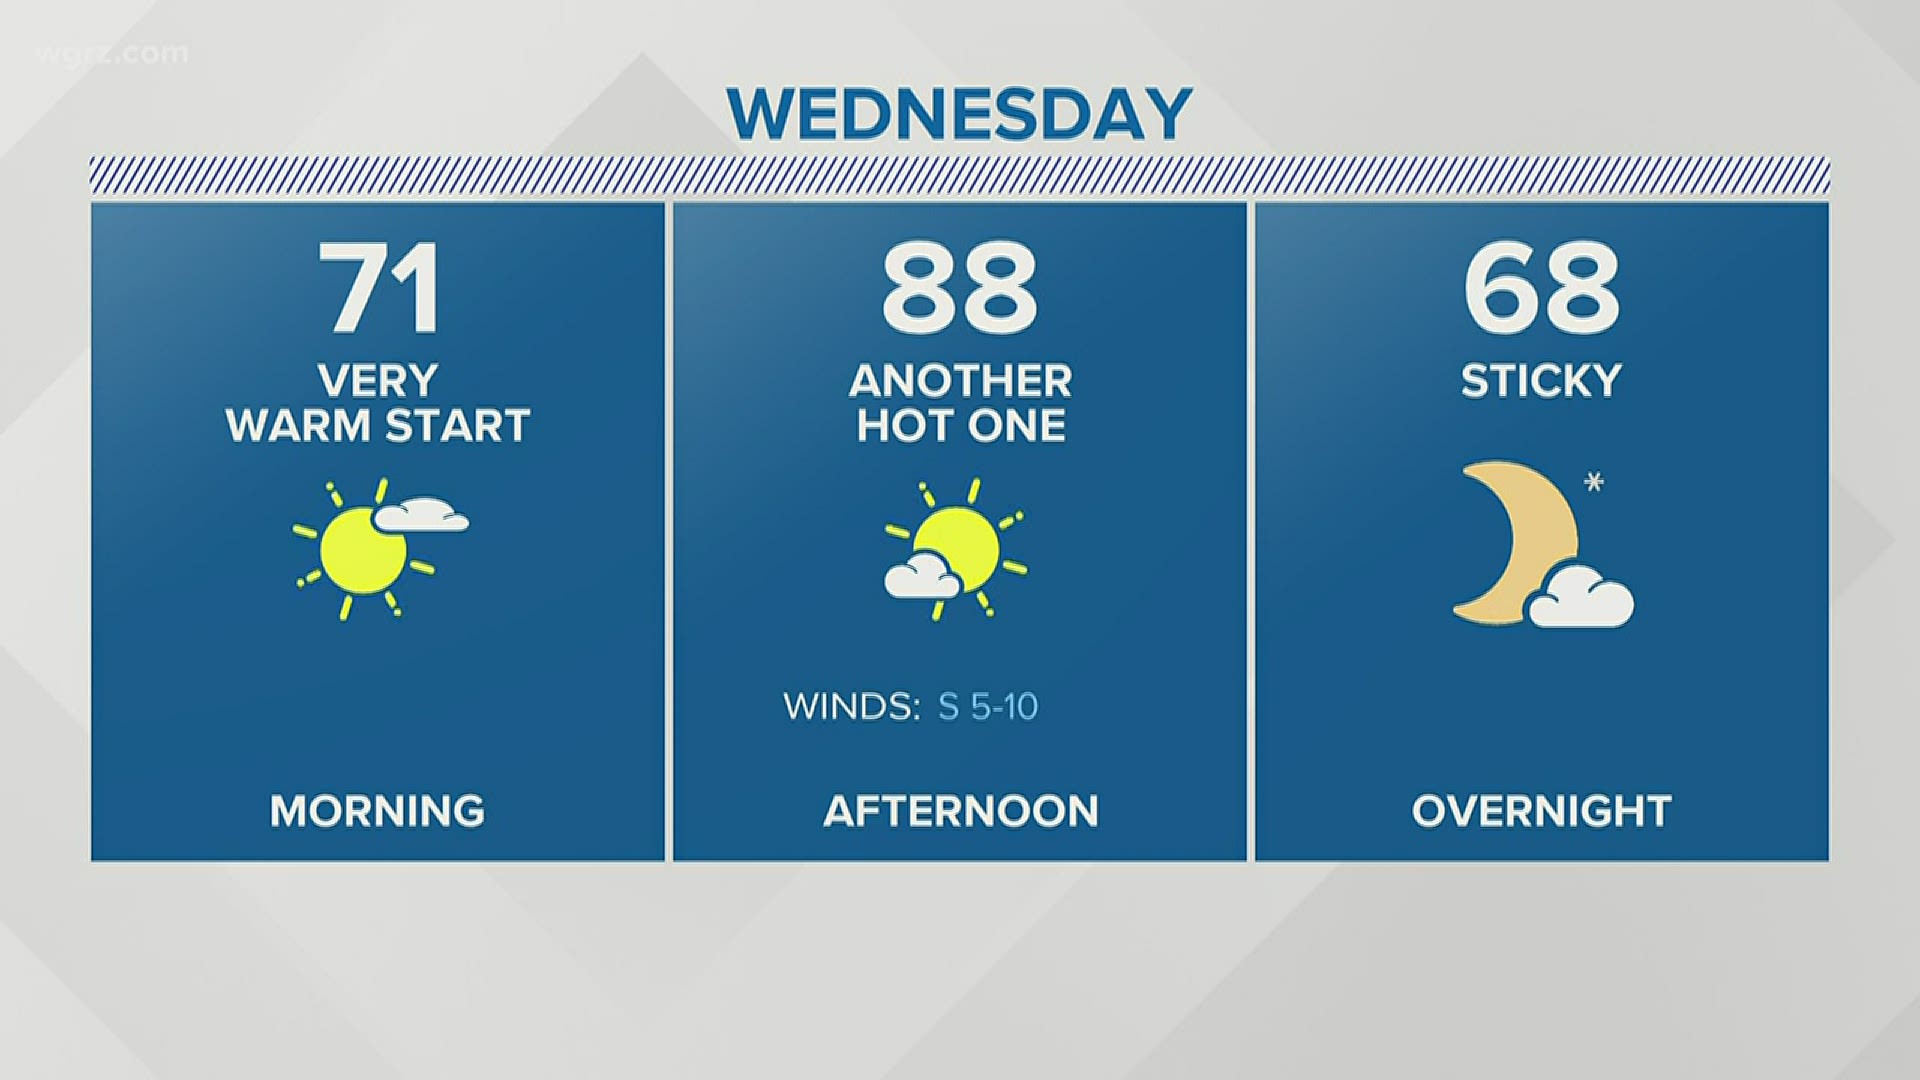 Expect dry weather Wednesday. Thursday is when we start getting a little more active, especially in the afternoon. Scattered thunderstorms will pop up inland.